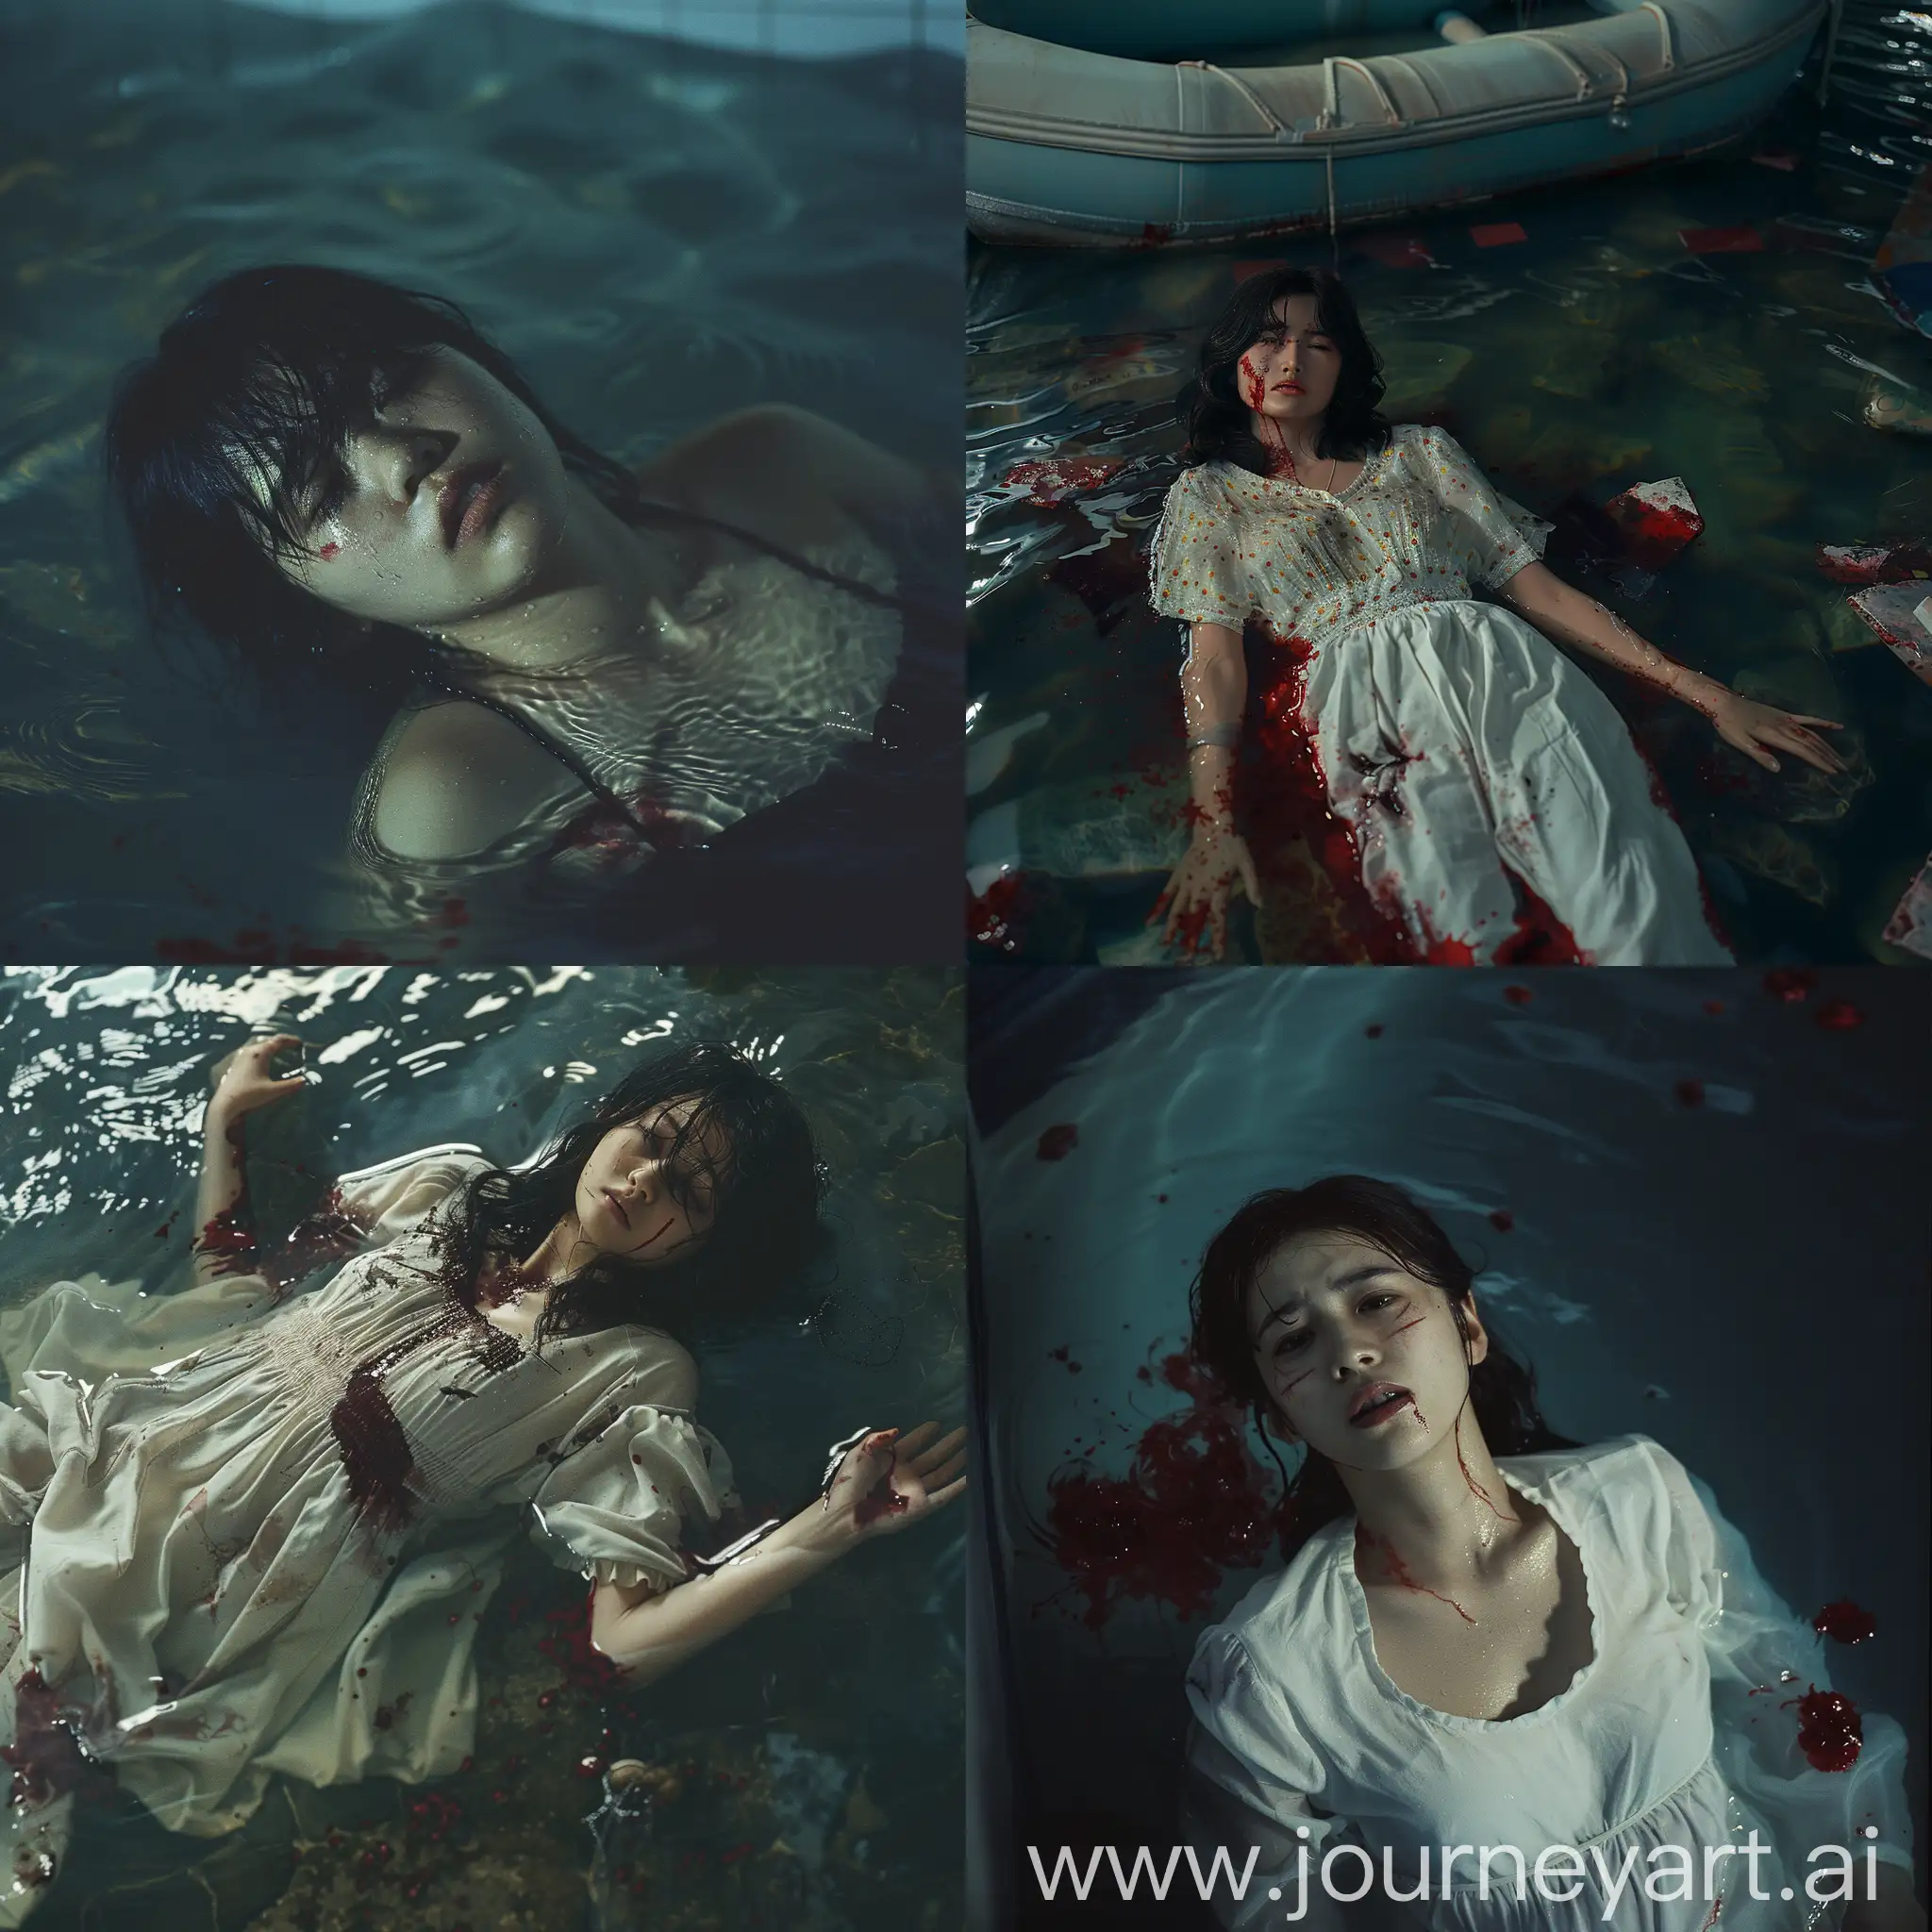 realistic movie stills, full body, full shot, wide shot, Japanese beautiful female, Even in our sleep, pain that cannot forget falls drop by drop upon the heart, and in our own despair, against our will, ultra high-quality photograph, shot on dslr, uncropped, 8k, incredible depth, by shintaro kago, Jeremy Mann, Ismail Inceoglu, Injured, floating, water stained with blood, realism, clear light and shadow, movie texture, film photos, expired film, creating a melancholy atmosphere , aesthetics of violence, an amazing movie scene, strong dramatic tension, rich details, clear light and shadow, a strong sense of cinema